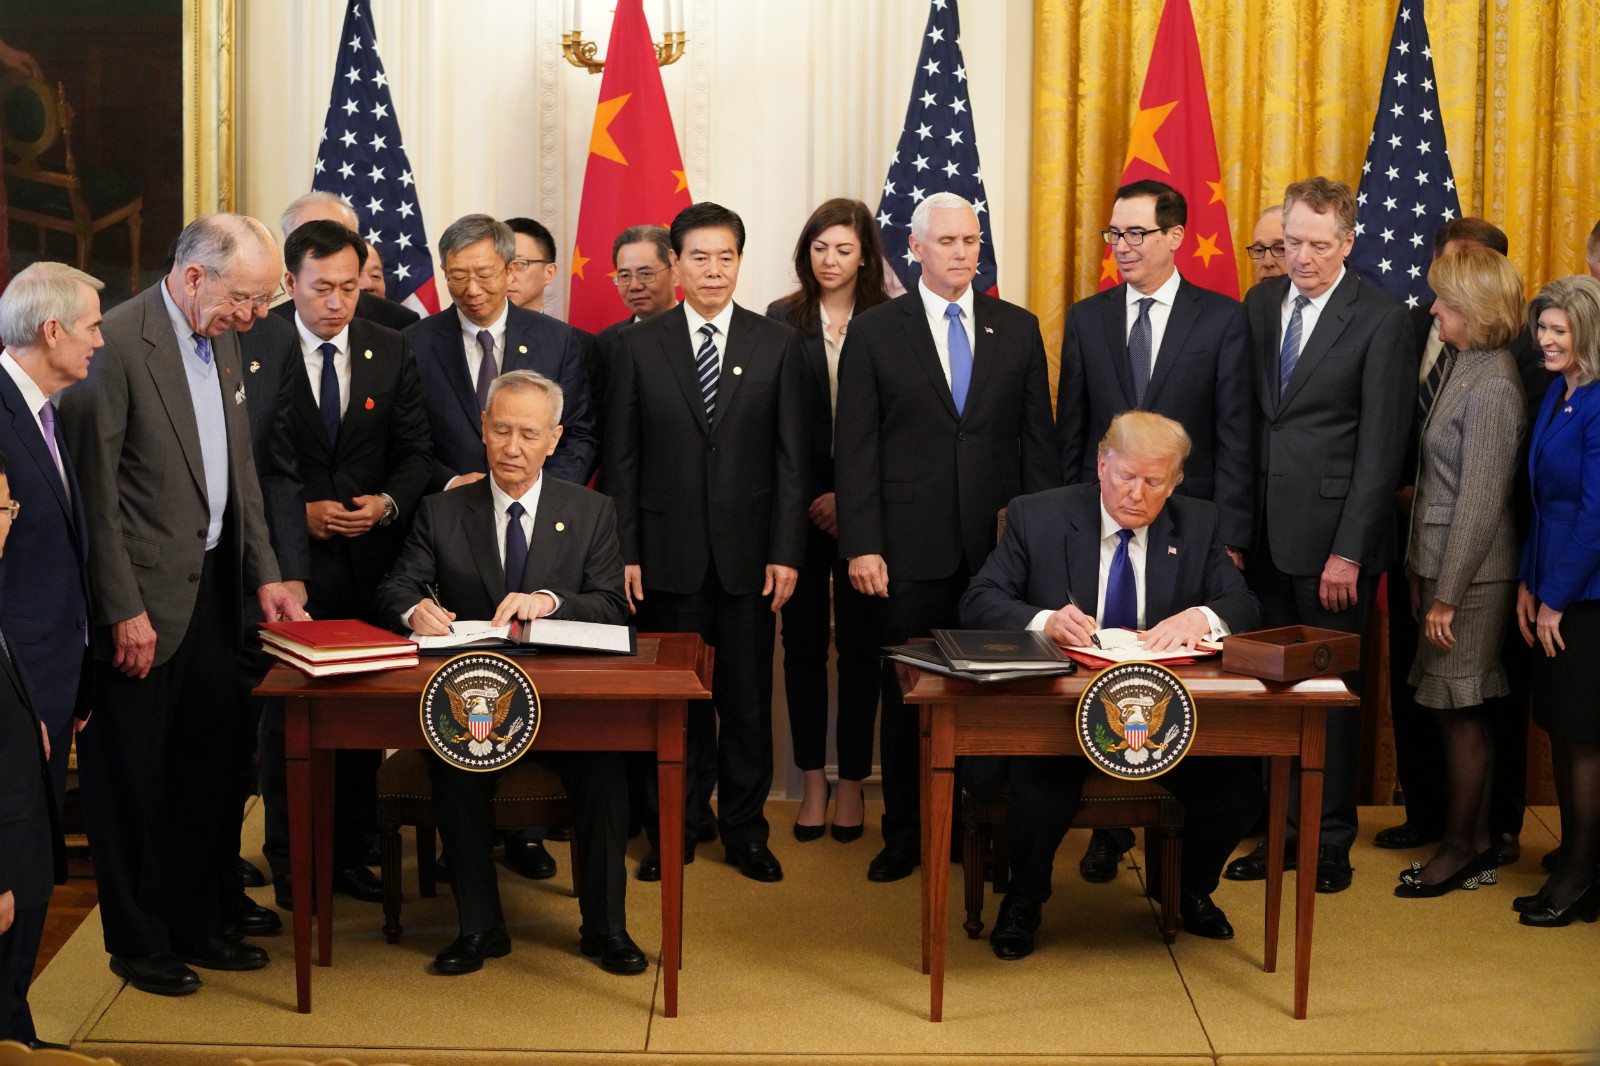 U.S. President Donald Trump and Chinese Vice Premier Liu He, who is also a member of the Political Bureau of the Communist Party of China Central Committee and chief of the Chinese side of the China-U.S. comprehensive economic dialogue, sign the China-U.S. phase-one economic and trade agreement during a ceremony at the East Room of the White House in Washington D.C., the United States, Jan. 15, 2020. (Xinhua/Wang Ying)